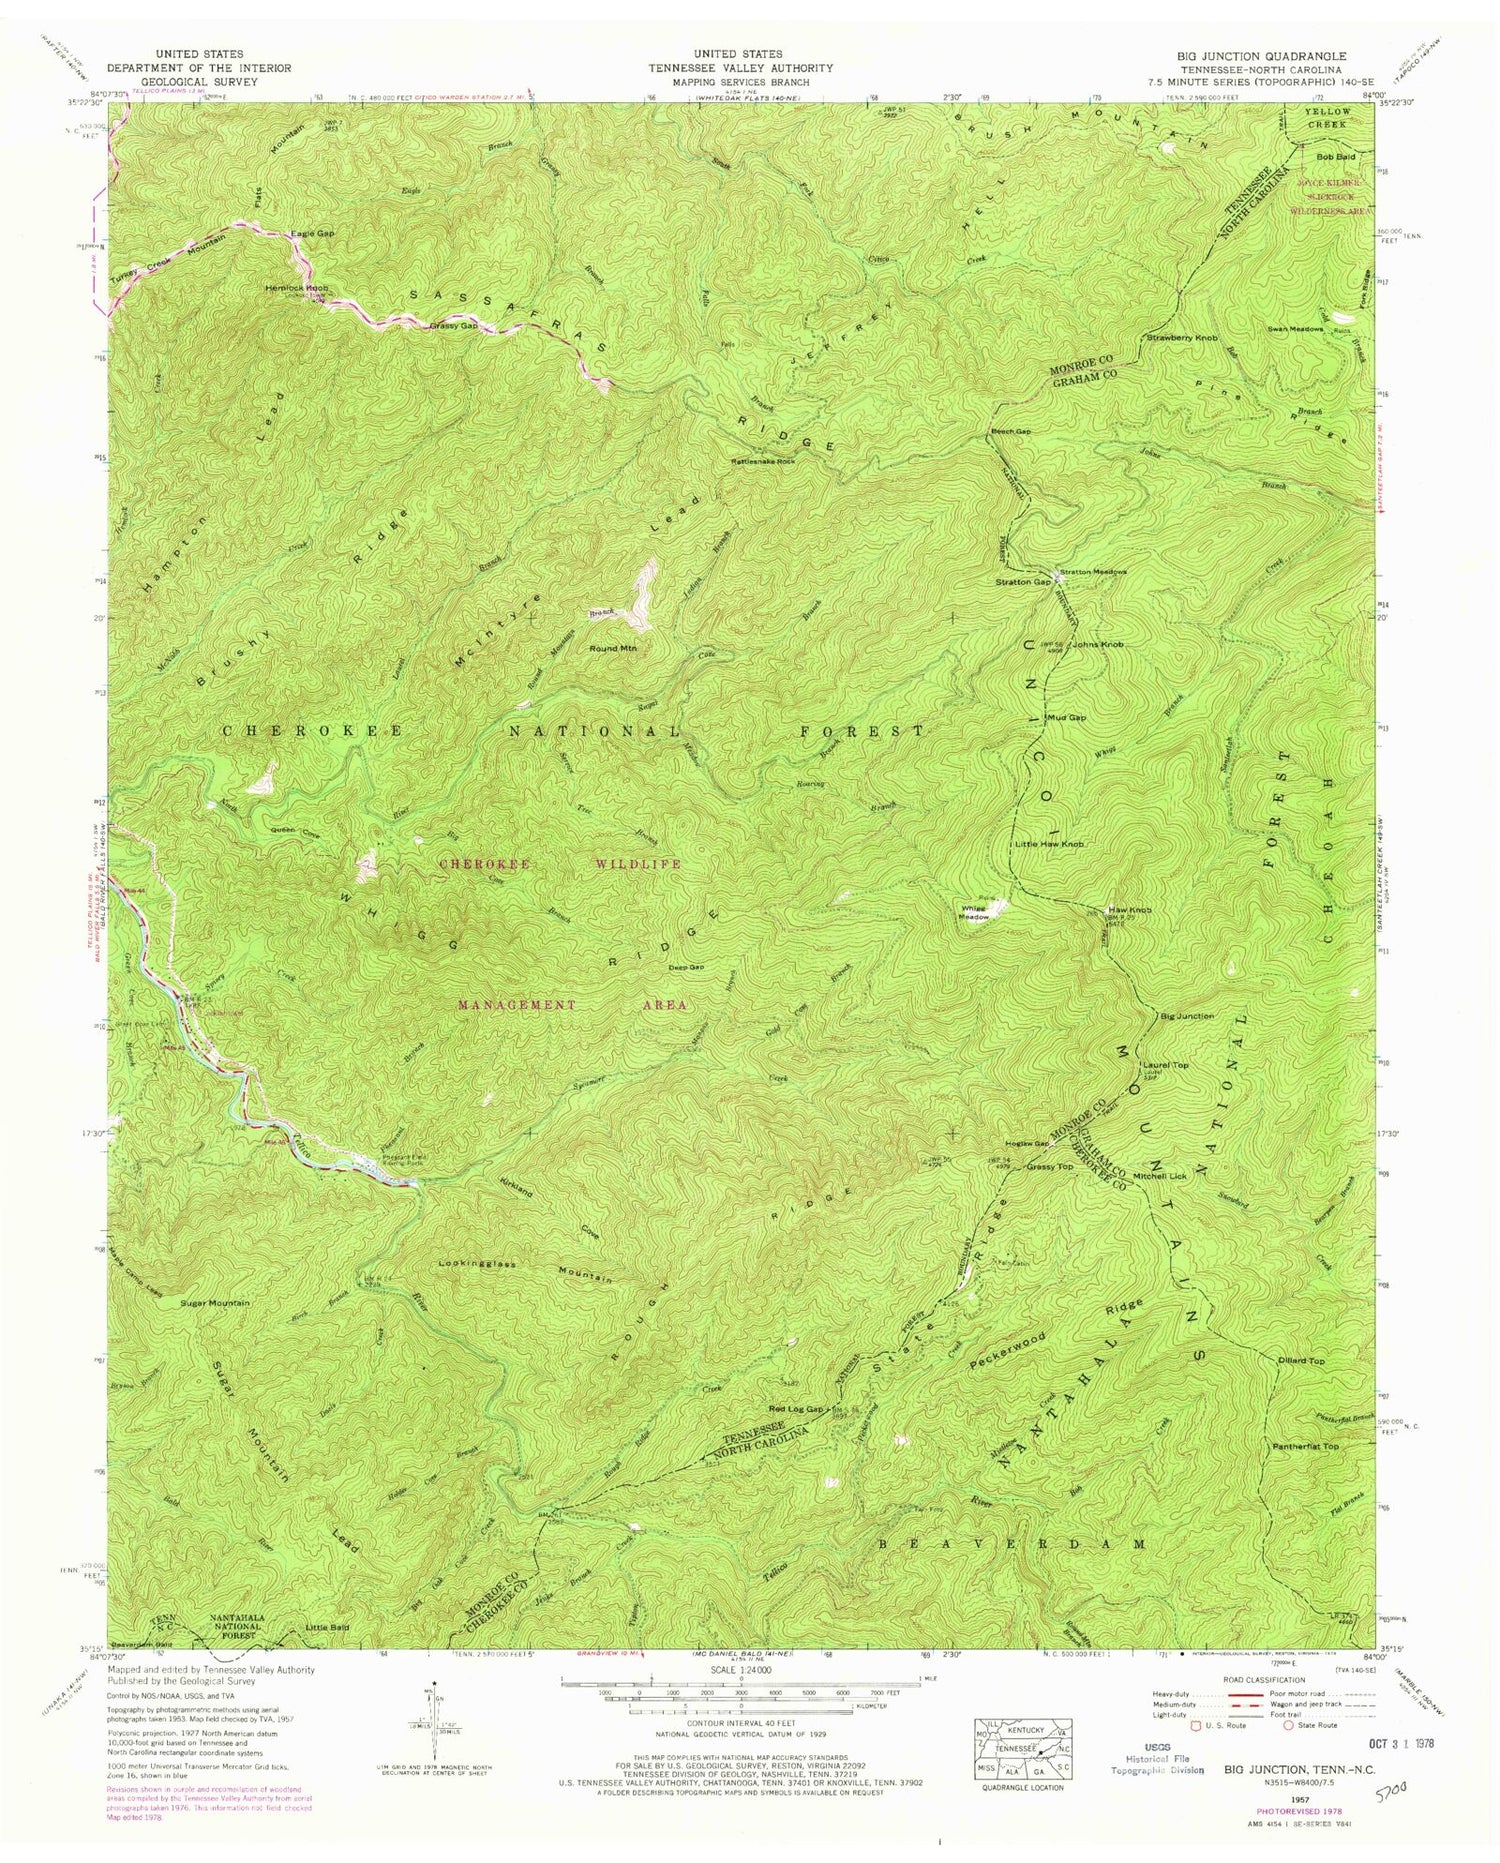 Classic USGS Big Junction Tennessee 7.5'x7.5' Topo Map Image